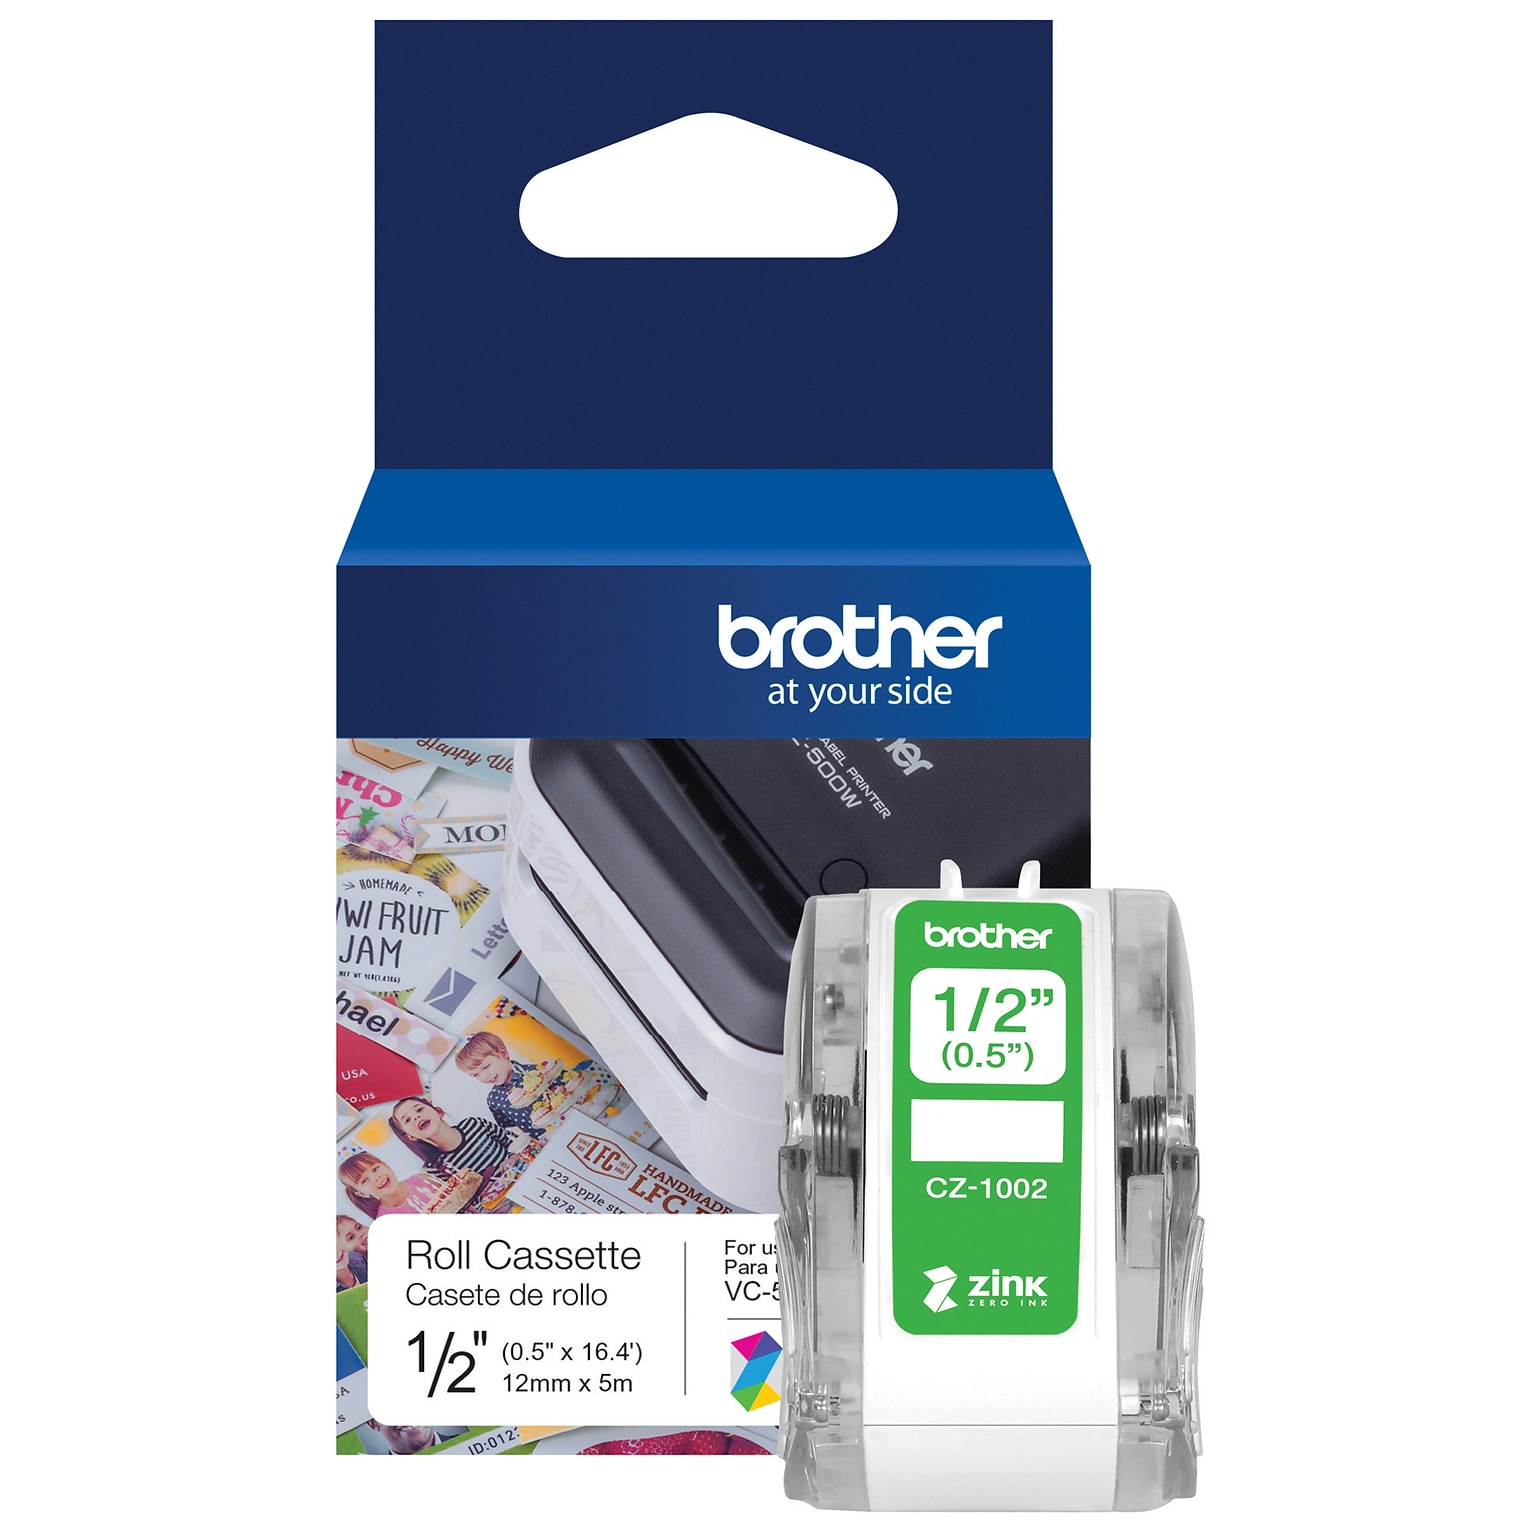 Brother CZ-1002 Continuous Paper Label Roll with ZINK® Zero Ink technology, 1/2 x 16-4/10, Multicolored (C1002)